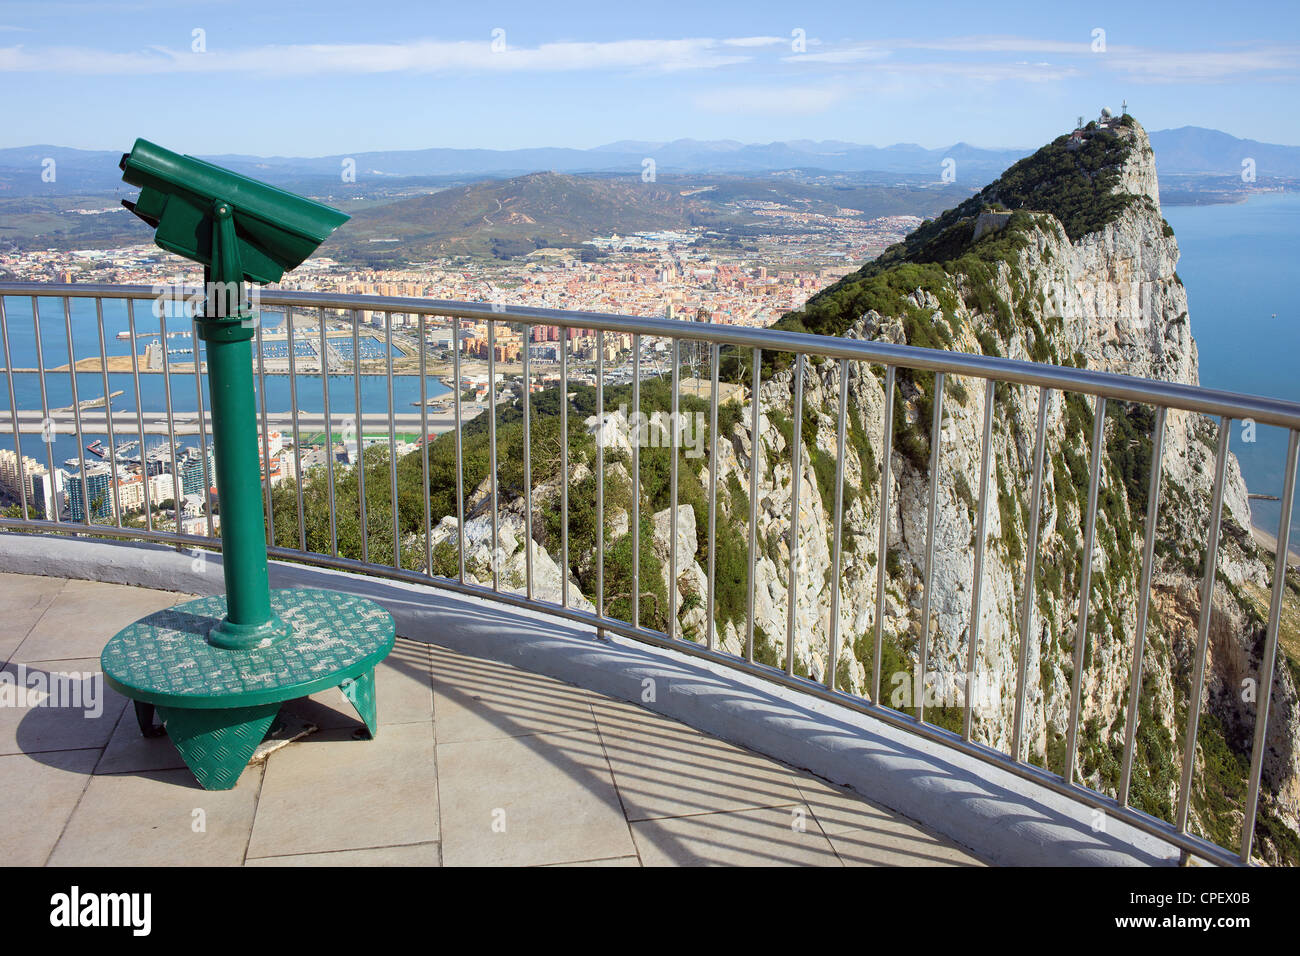 Gibraltar rock vantage point on southern Iberian Peninsula, La Linea city in Spain at the far end. Stock Photo